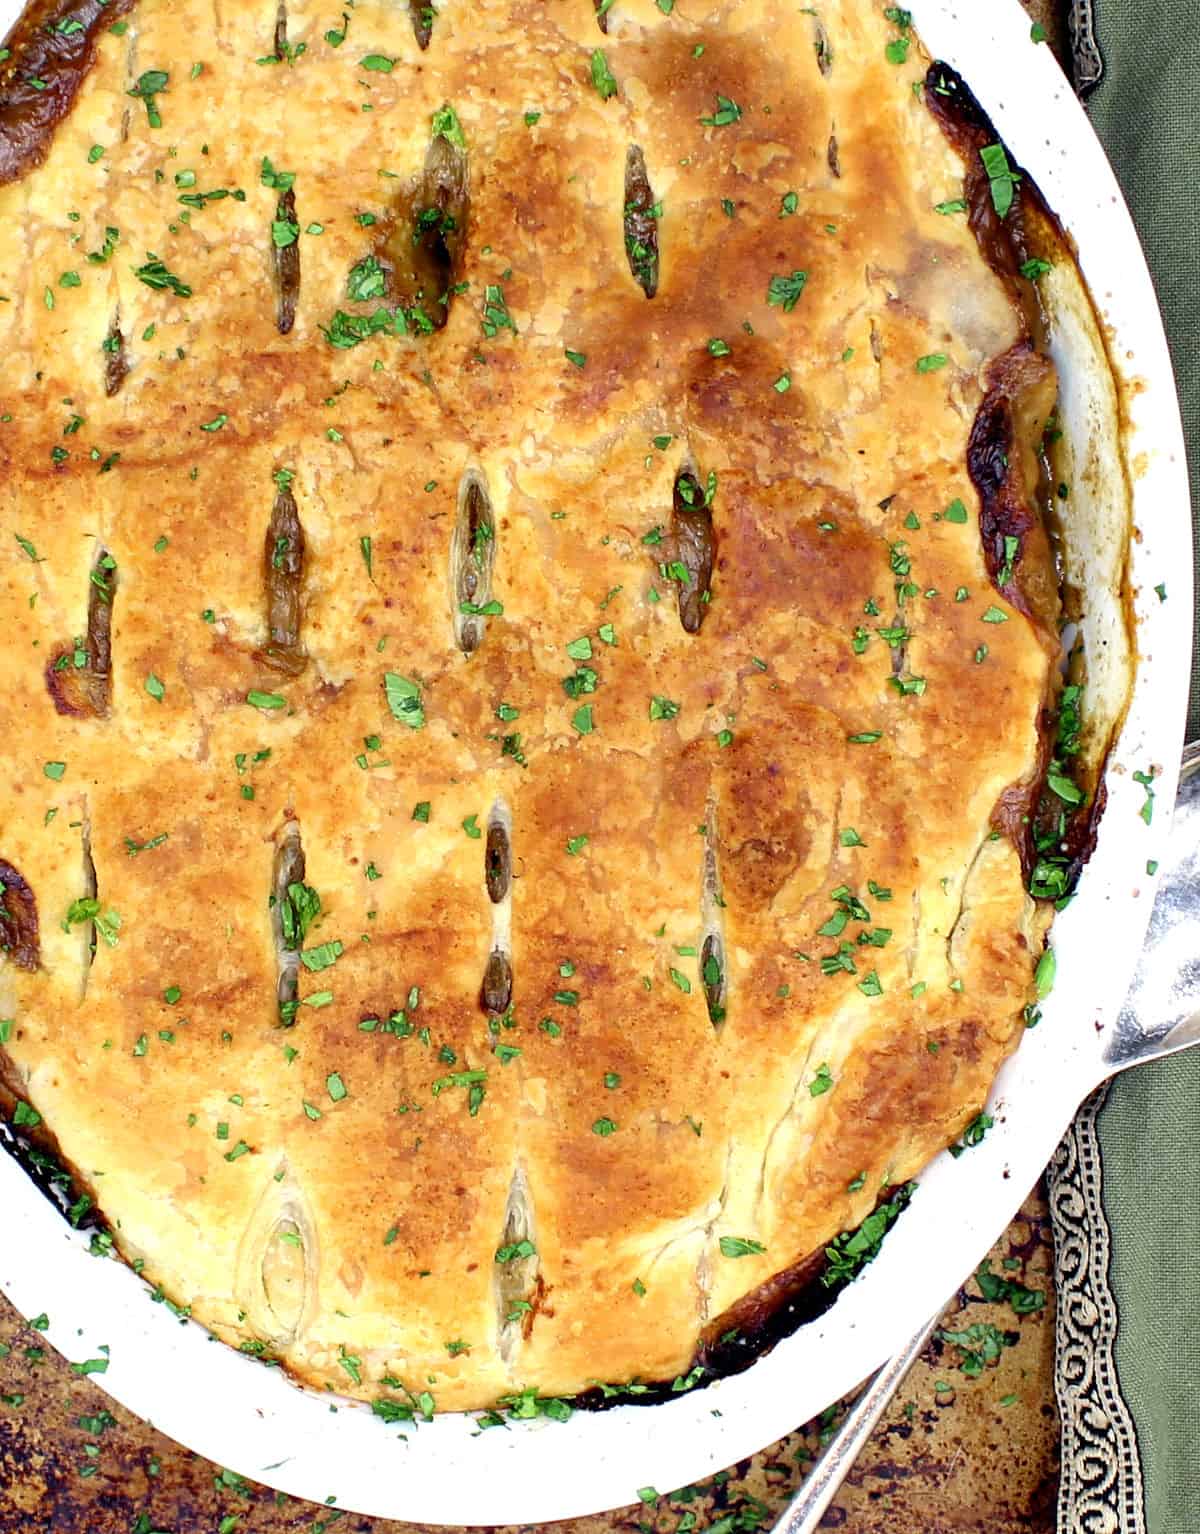 An oval white baking dish with a vegan pot pie that has a flaky golden crust made of puff pastry, with a filling of potatoes, mushrooms, carrots, onions, herbs and sausage on a baking sheet with a green napkin